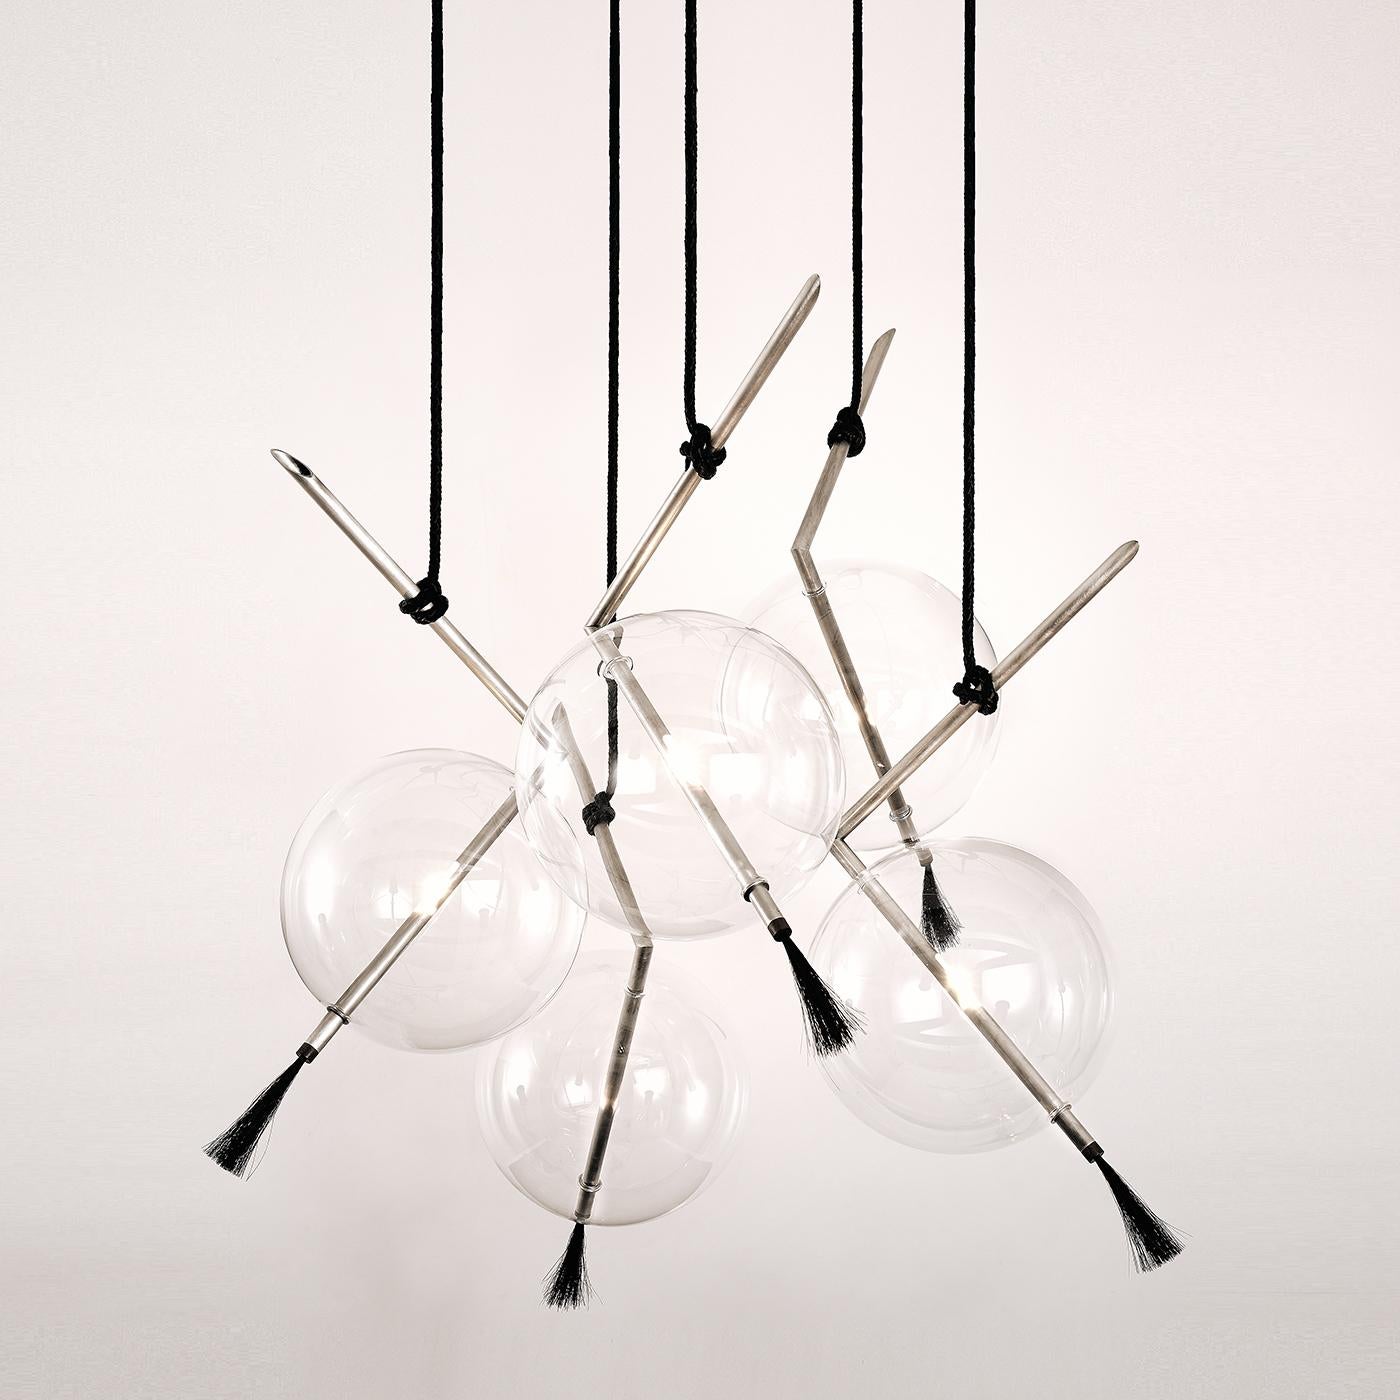 An eclectic mix of materials balanced in a contemporary design of great visual impact, this chandelier of the exclusive silver edition will create a dramatic focus in any interior. Five V-shaped arms made of brushed brass with a protective coating